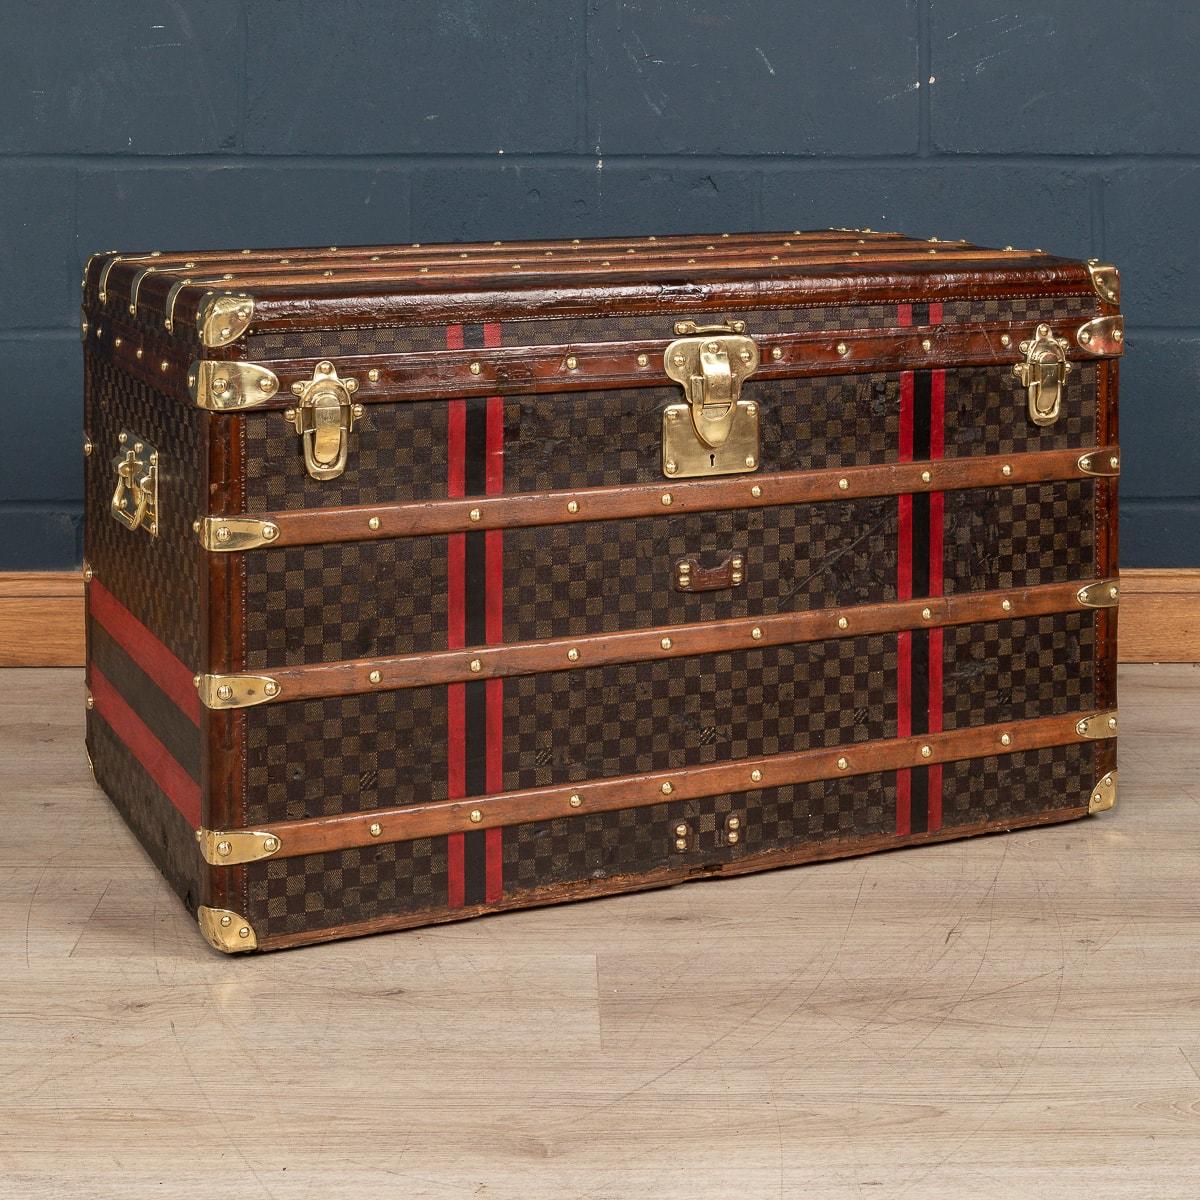 One of the rarest Louis Vuitton trunks to be offered, this trunk is covered in the world famous damier (checkerboard) canvas. Dating to around 1900, it is a wonderful example of such trunks.

Condition
In Good Condition - Some fading in areas of